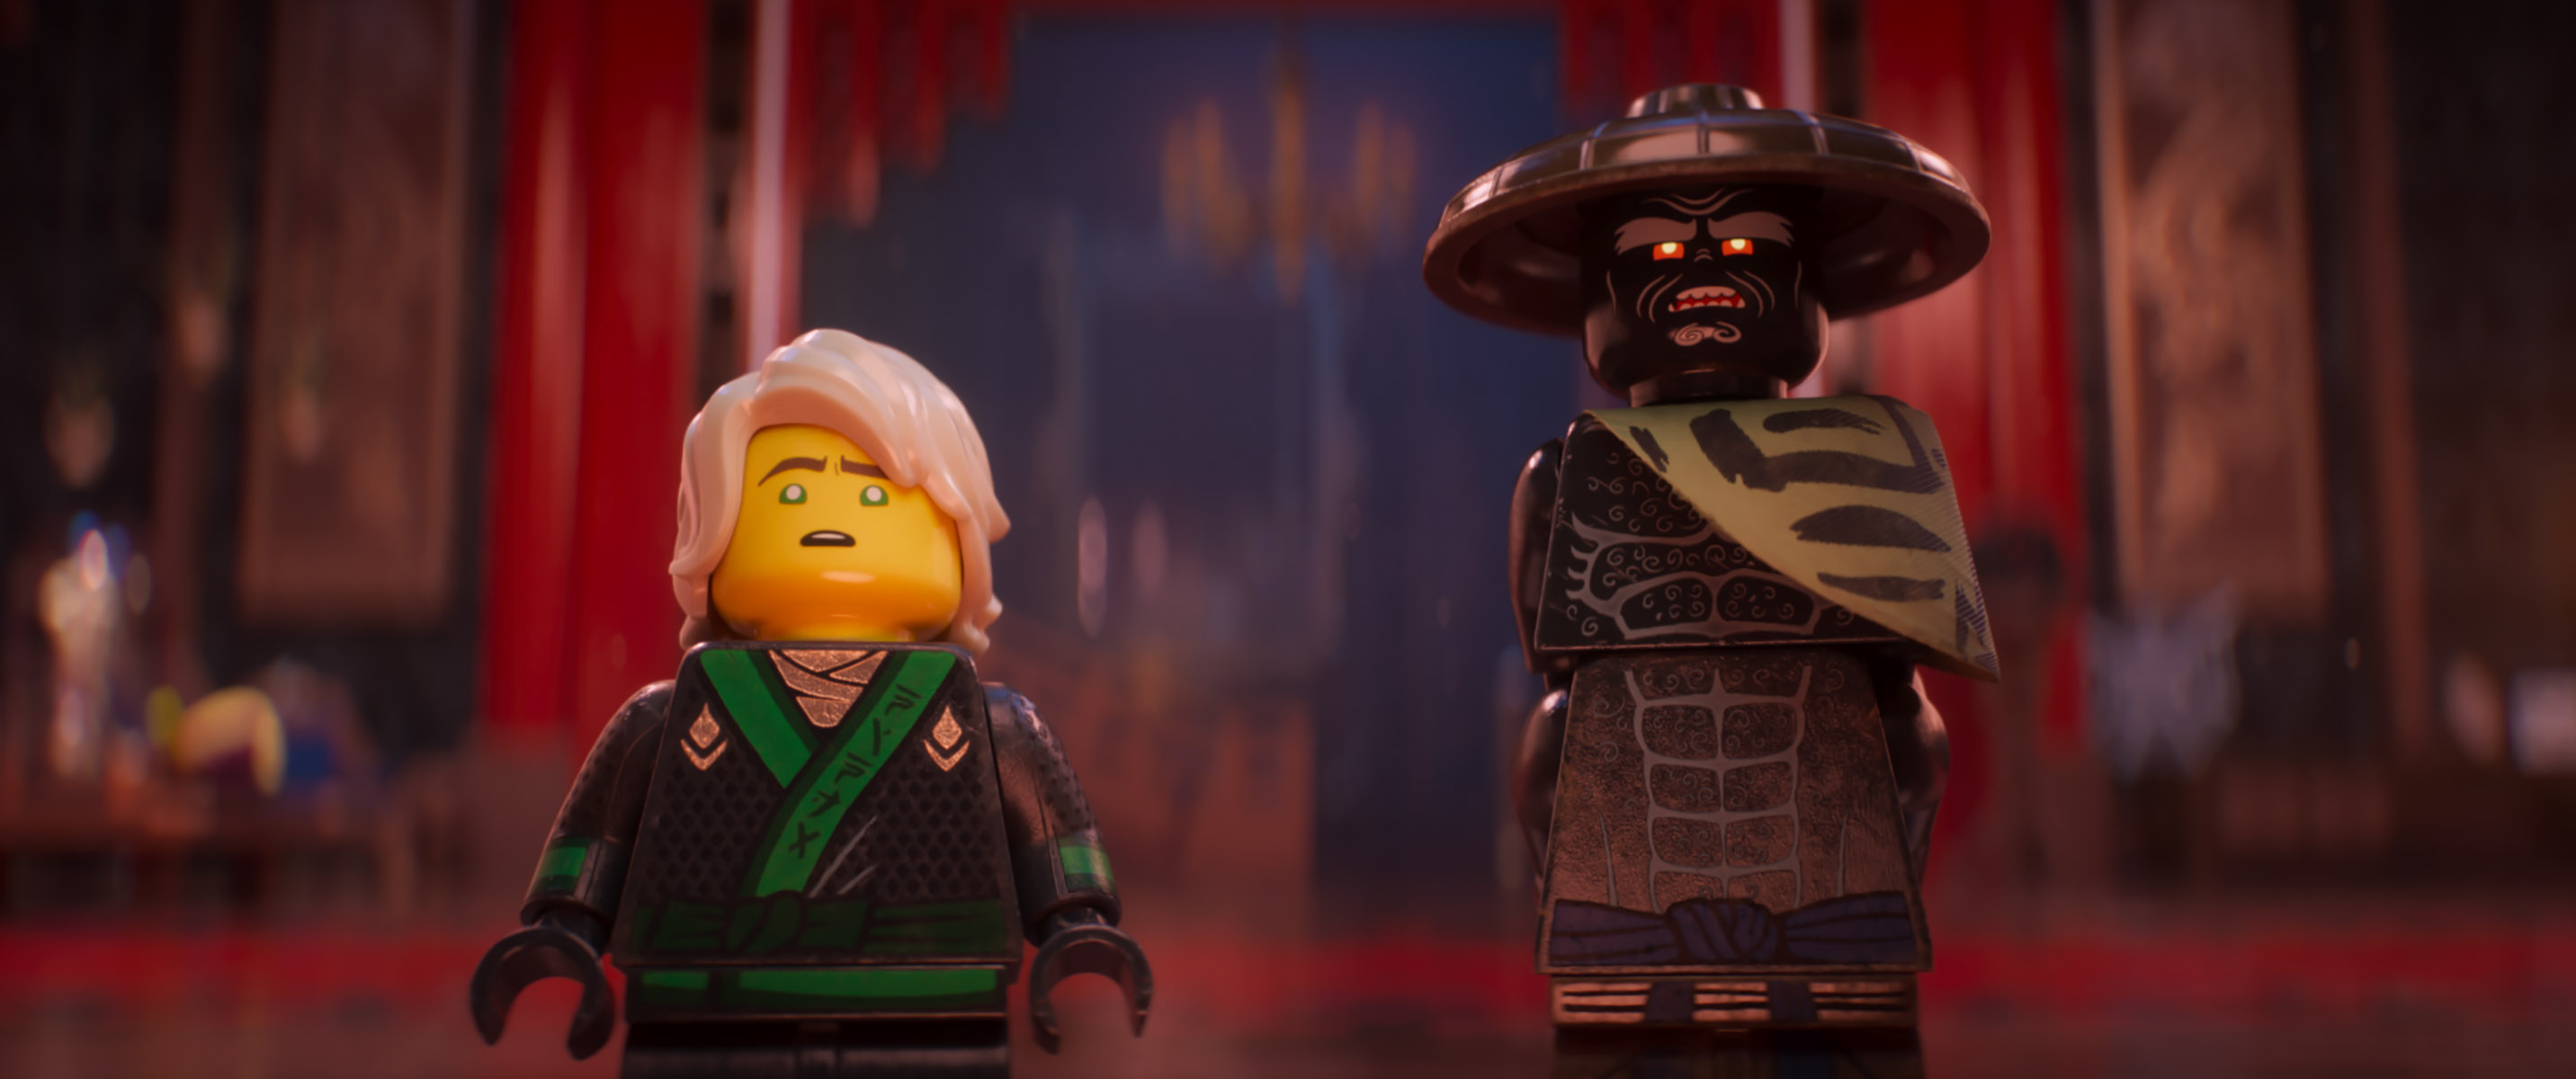 Where Can You Watch The Lego Ninjago Movie Why You Should Watch The Lego Ninjago Movie « lovestalgia